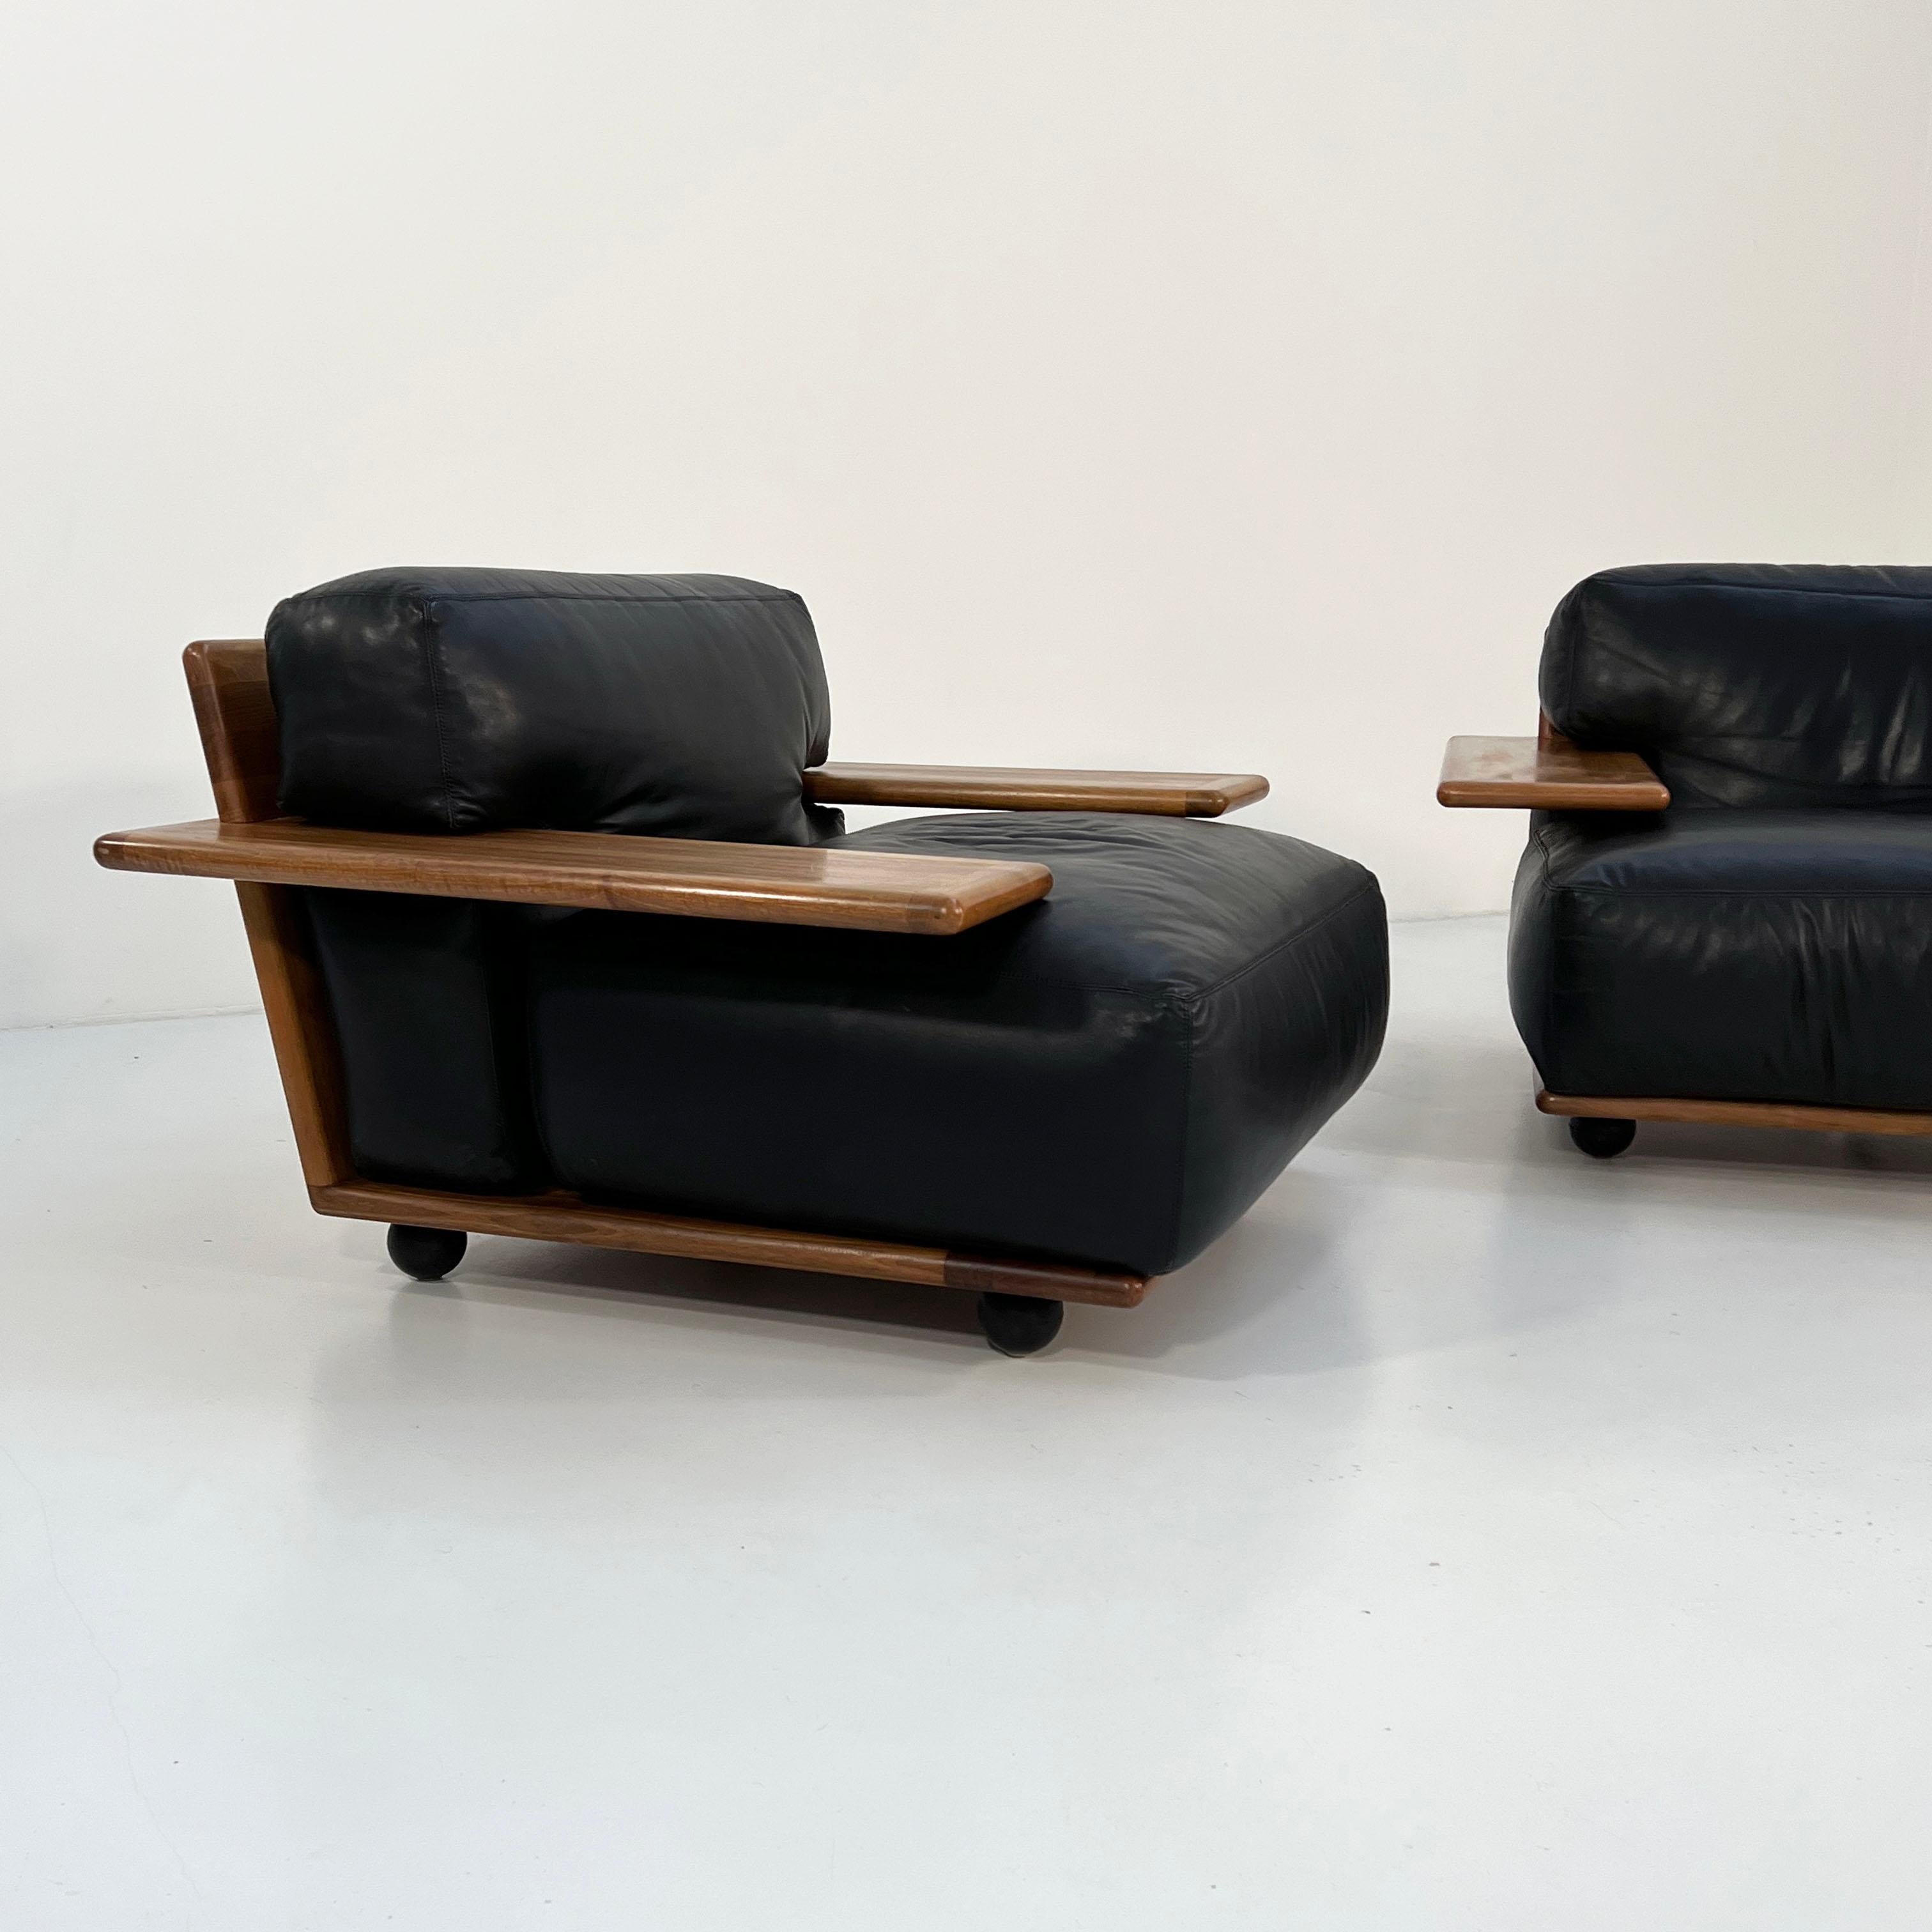 Pianura Armchair in Black Leather by Mario Bellini for Cassina, 1970s For Sale 1